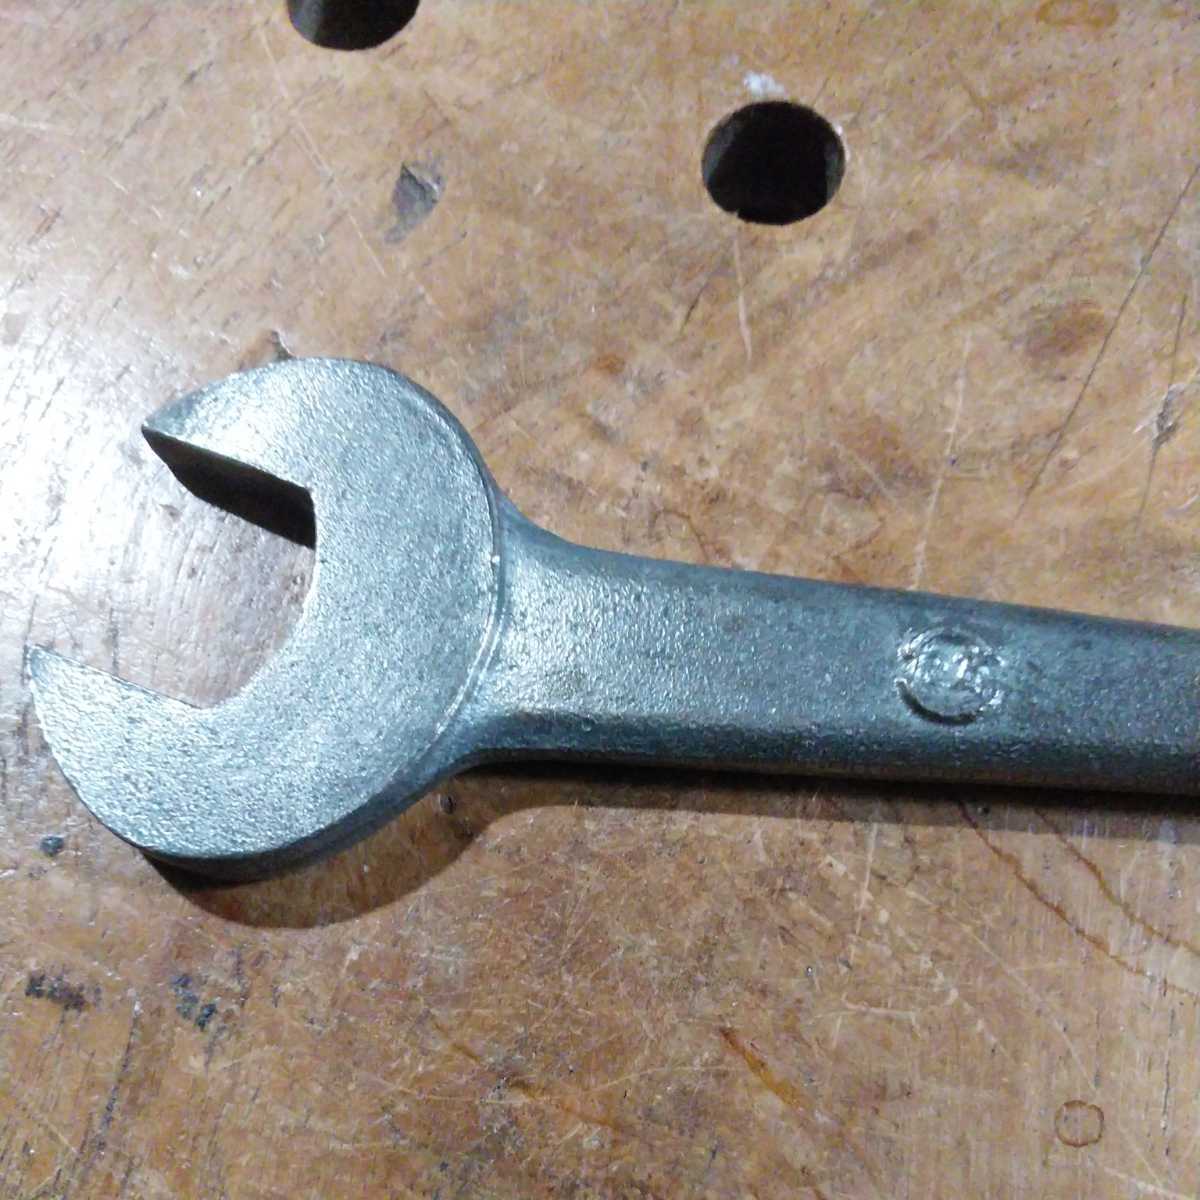  Tohatsu Tokyo engine loaded tool combination wrench tire lever attaching size inscription 19mm. total length 171.1mm. Ran pet Scrambler 